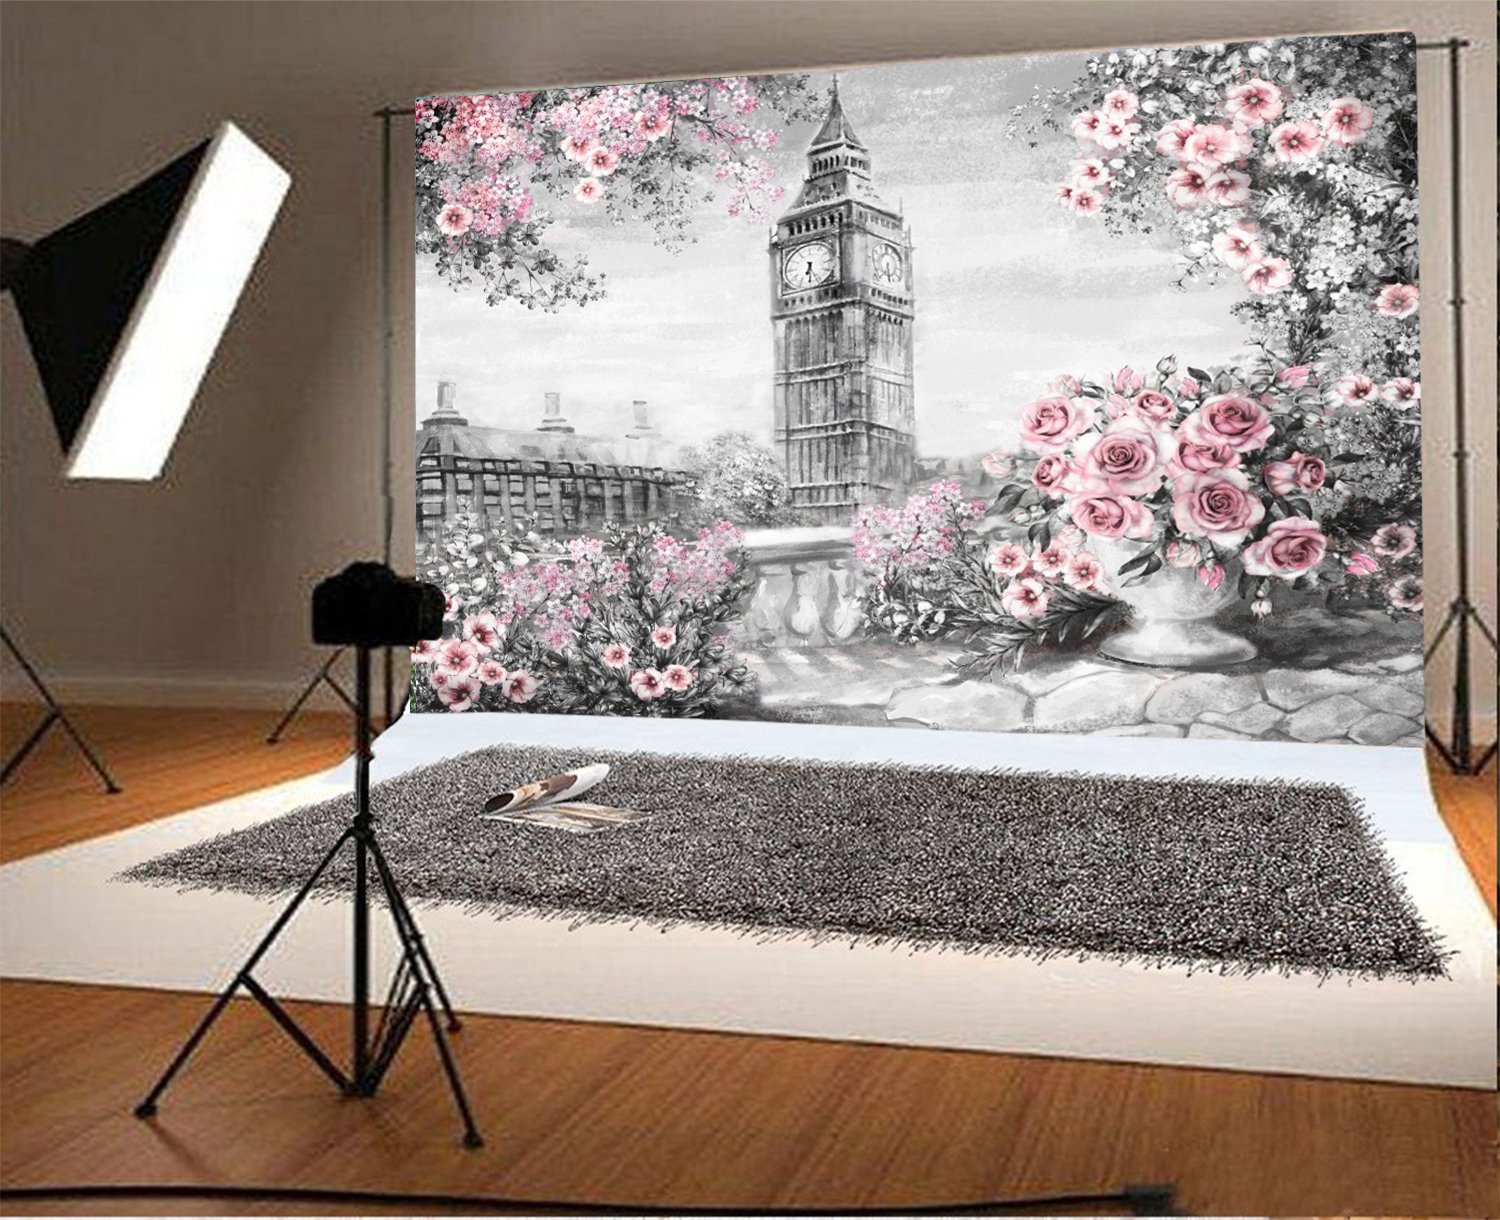 7x5ft Backdrop Photography Background London Big Ben Art Concept Pink Flowers Blooming Bluildings Hand Drawing Picture Wallpaper Backdrop Photo Studio Portrait Backdrop Shoot Video - image 1 of 3